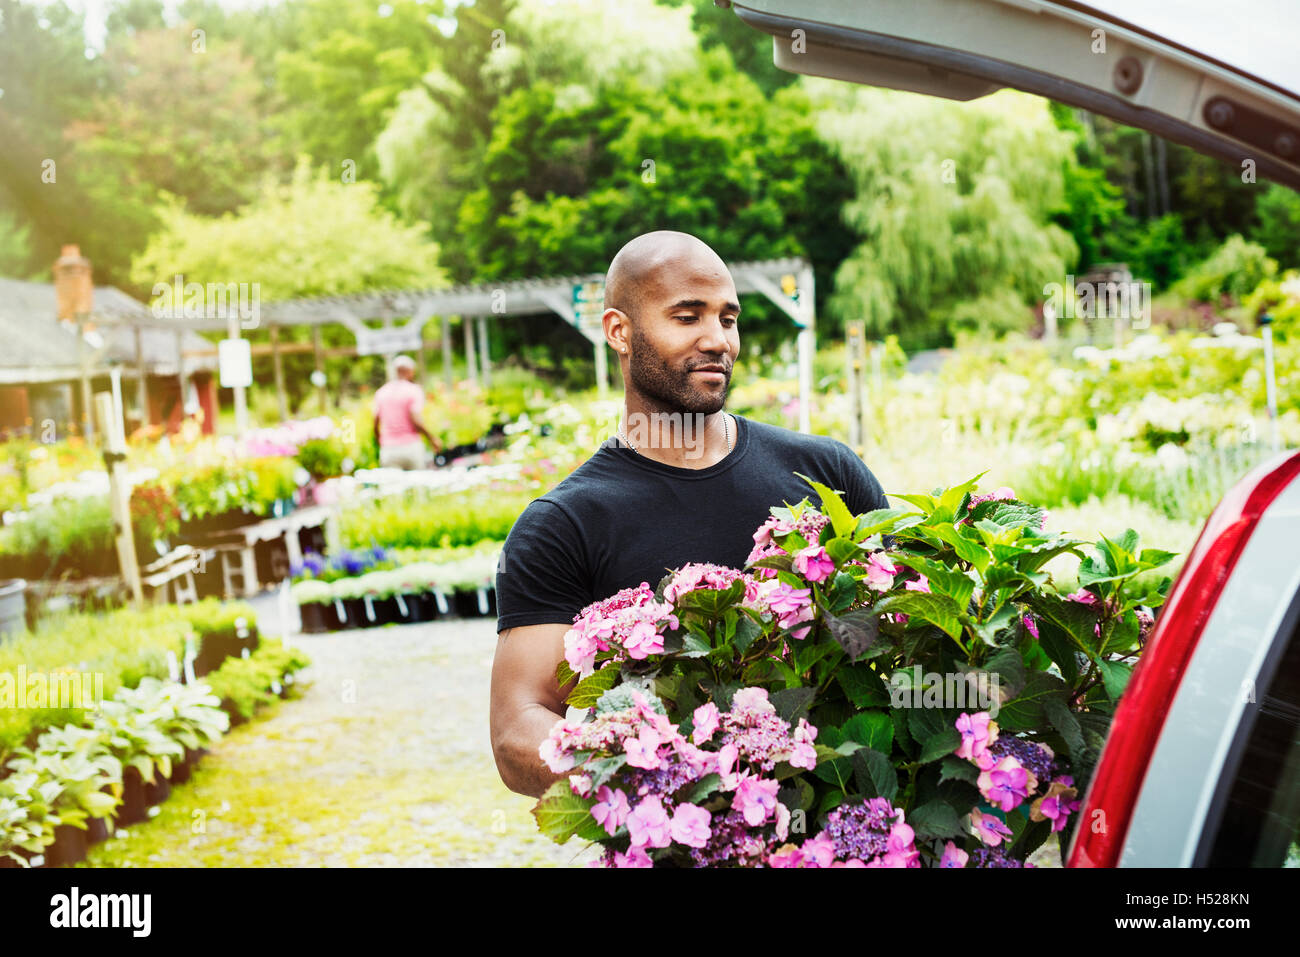 Car parked at a garden centre, a man loading flowers into the boot. Stock Photo